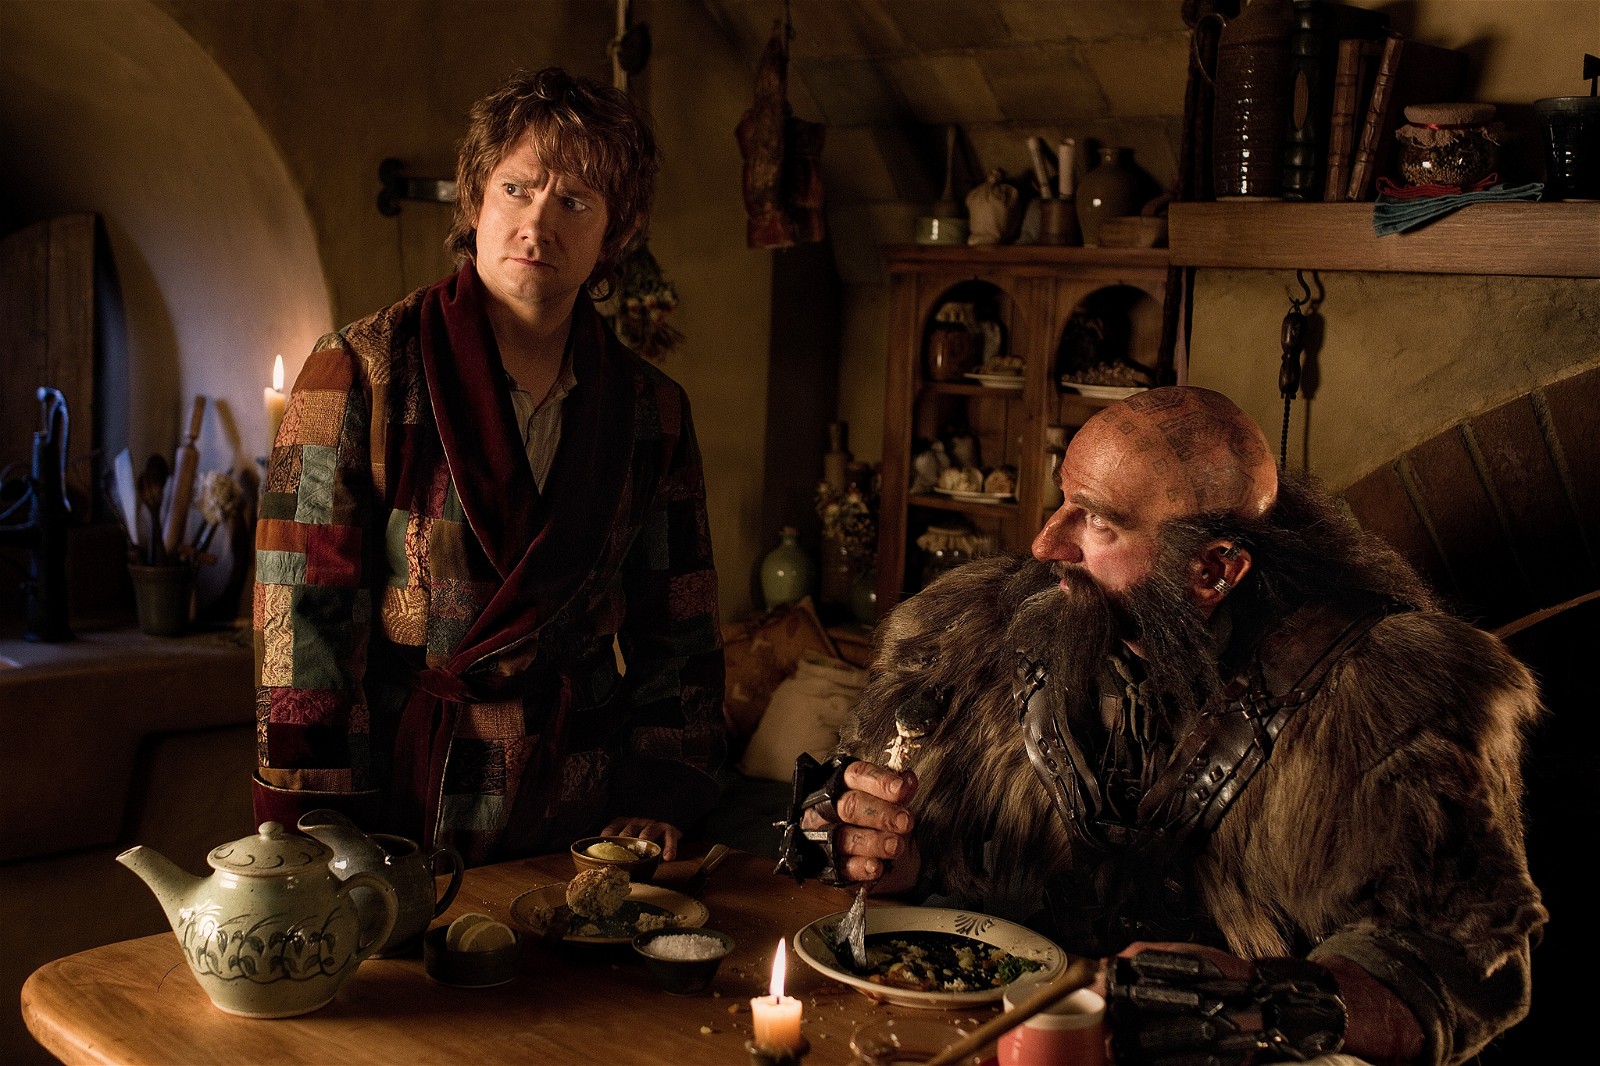 a still from The Hobbit: An Unexpected Journey